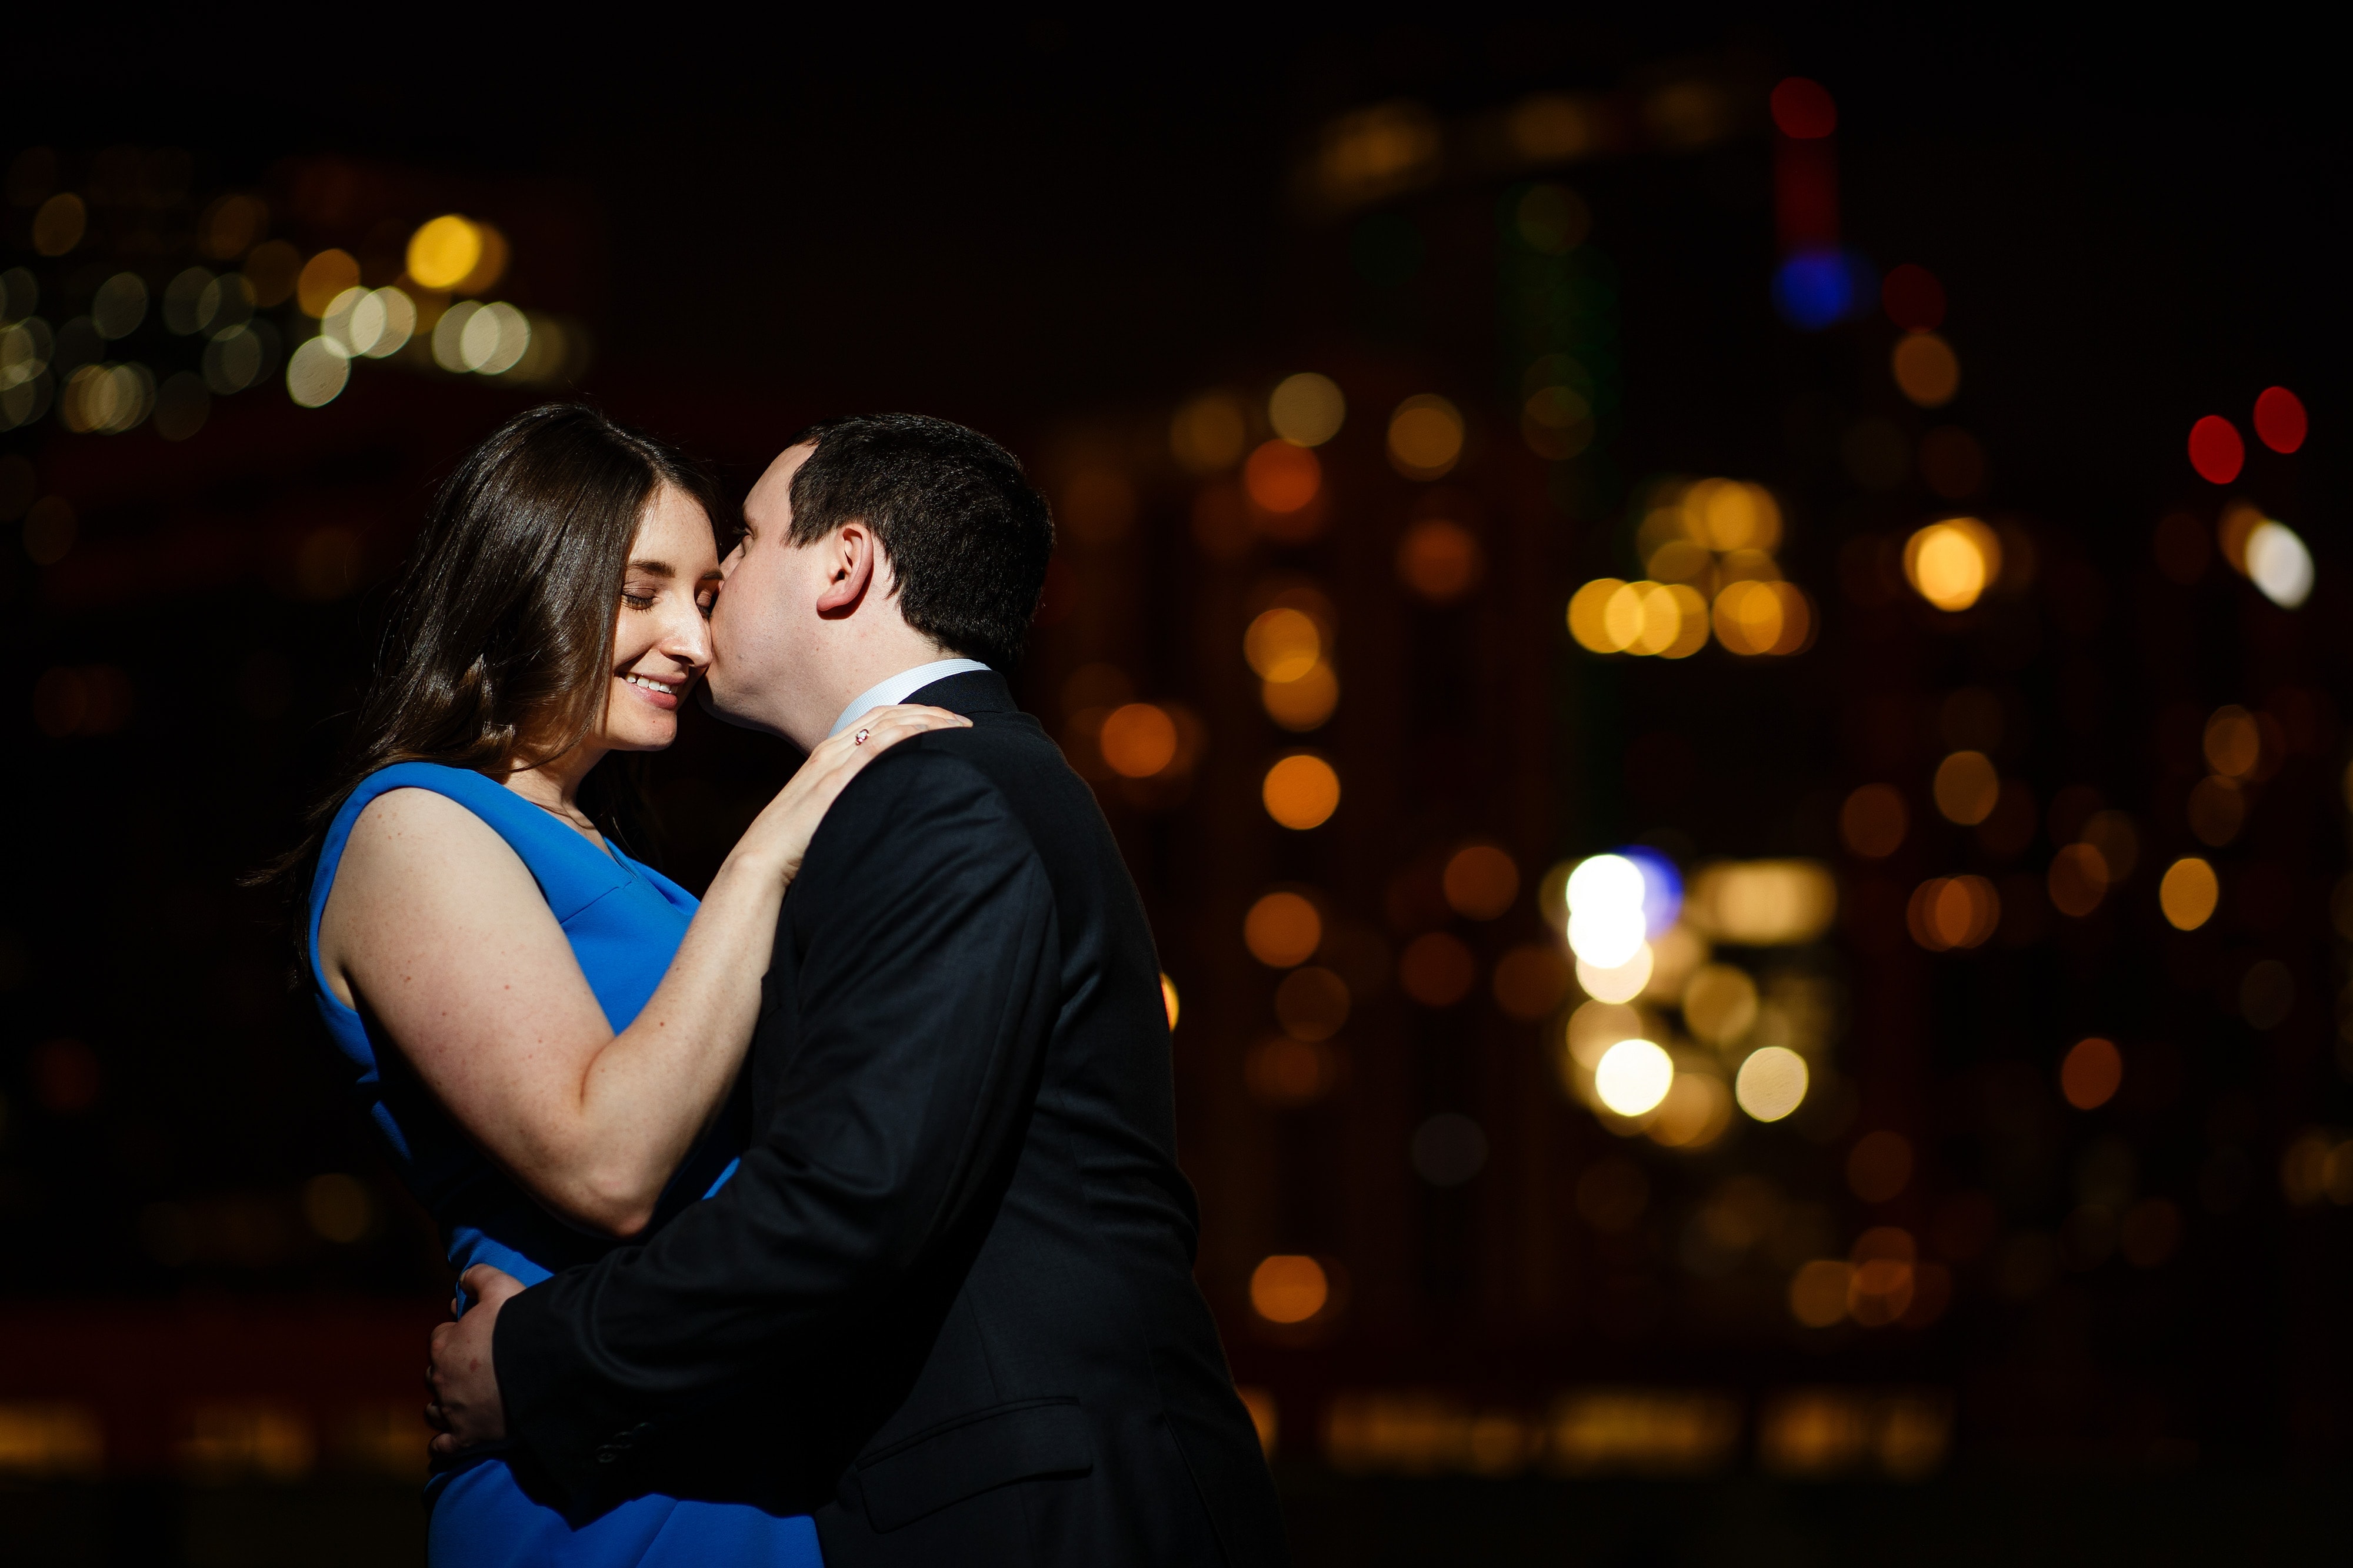 Joel kisses Katie with the Denver skyline in the background during their downtown Denver engagement session at night